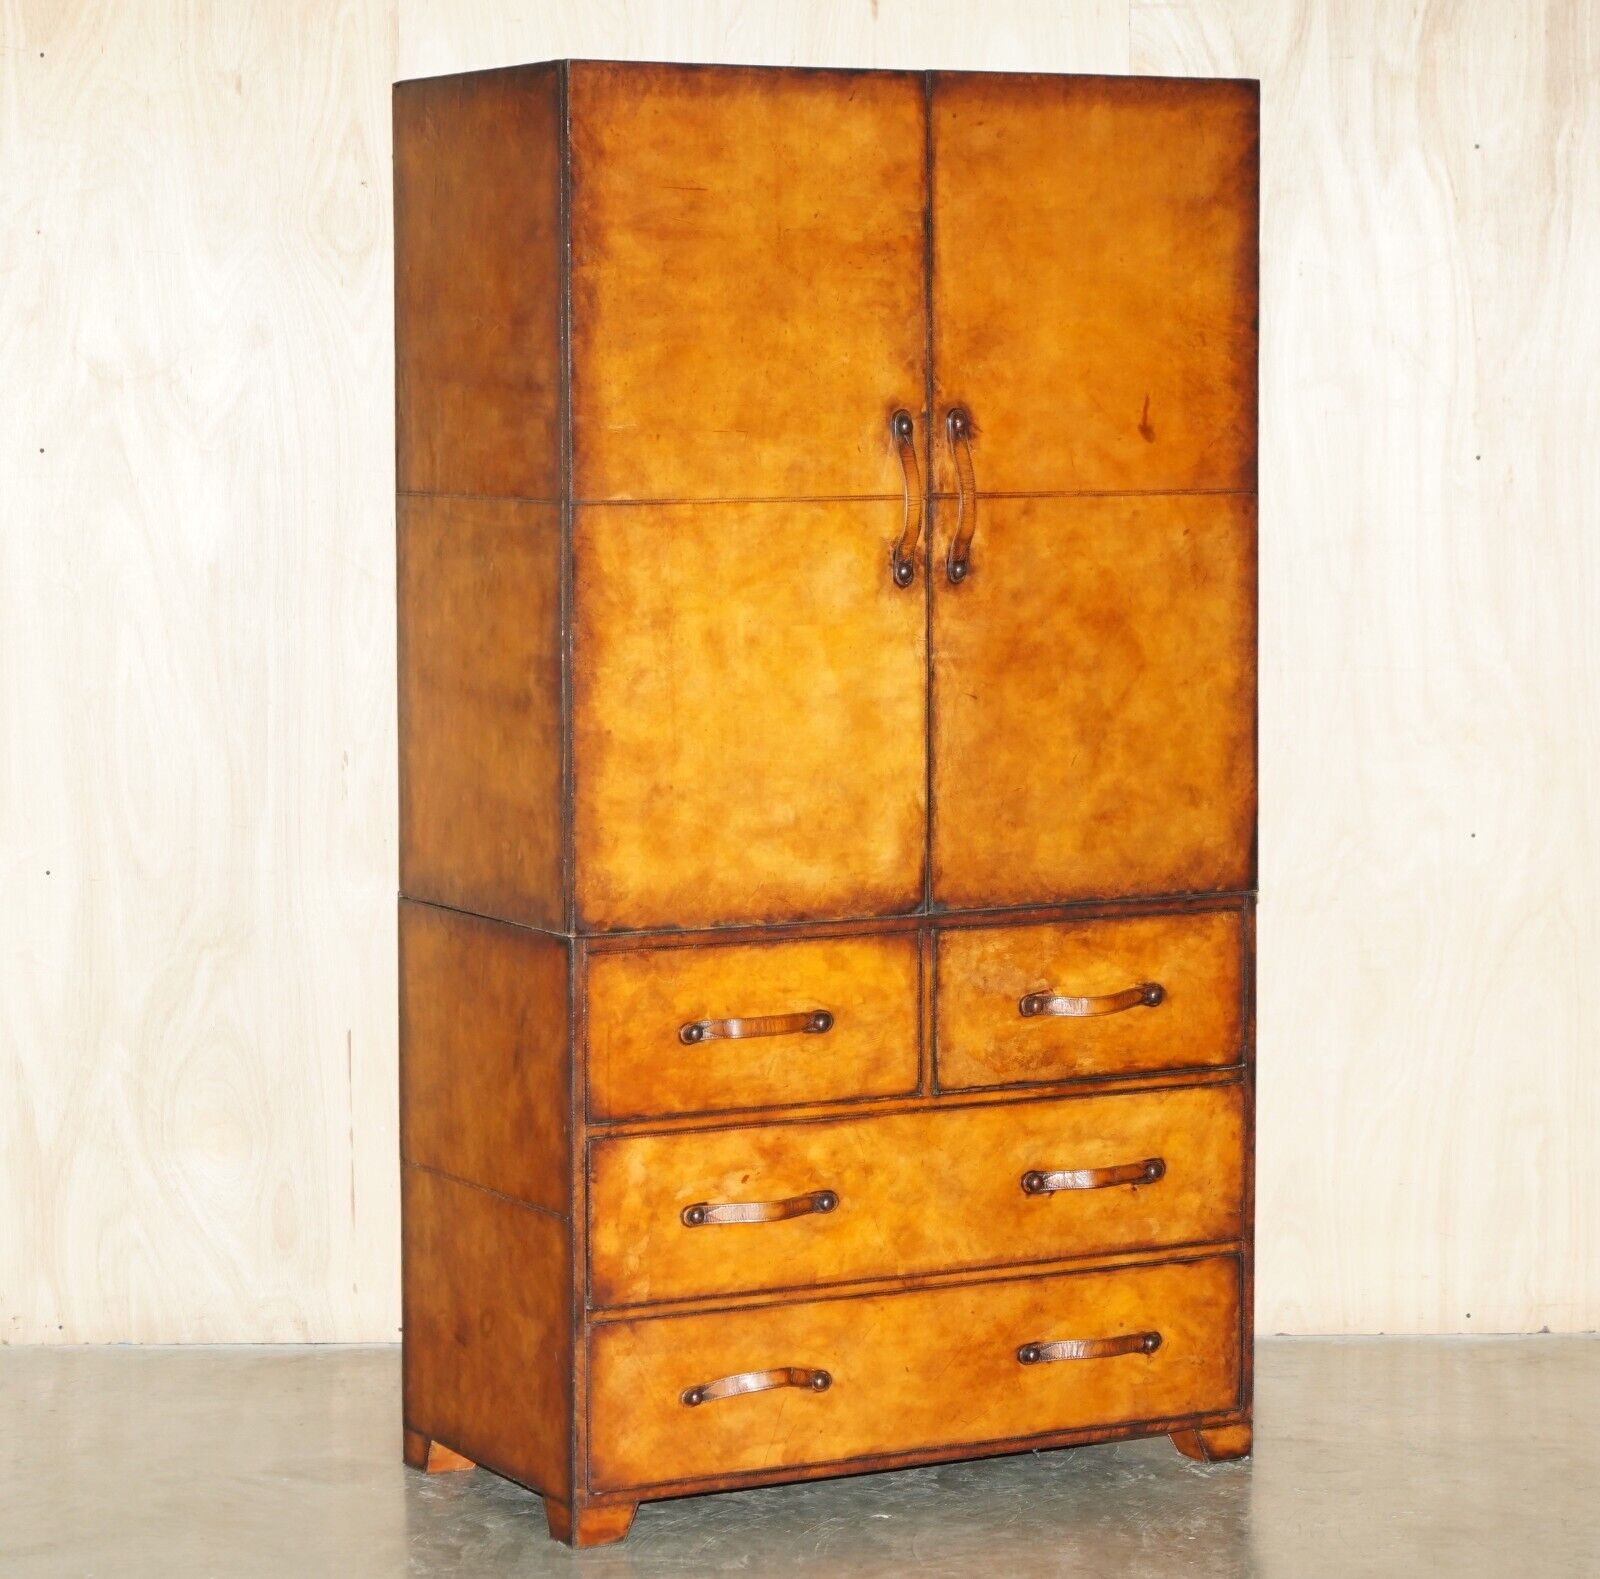 ONE OF A KIND HAND STITCHED & HAND DYED BROWN LEATHER WARDROBE WITH DRAWERS